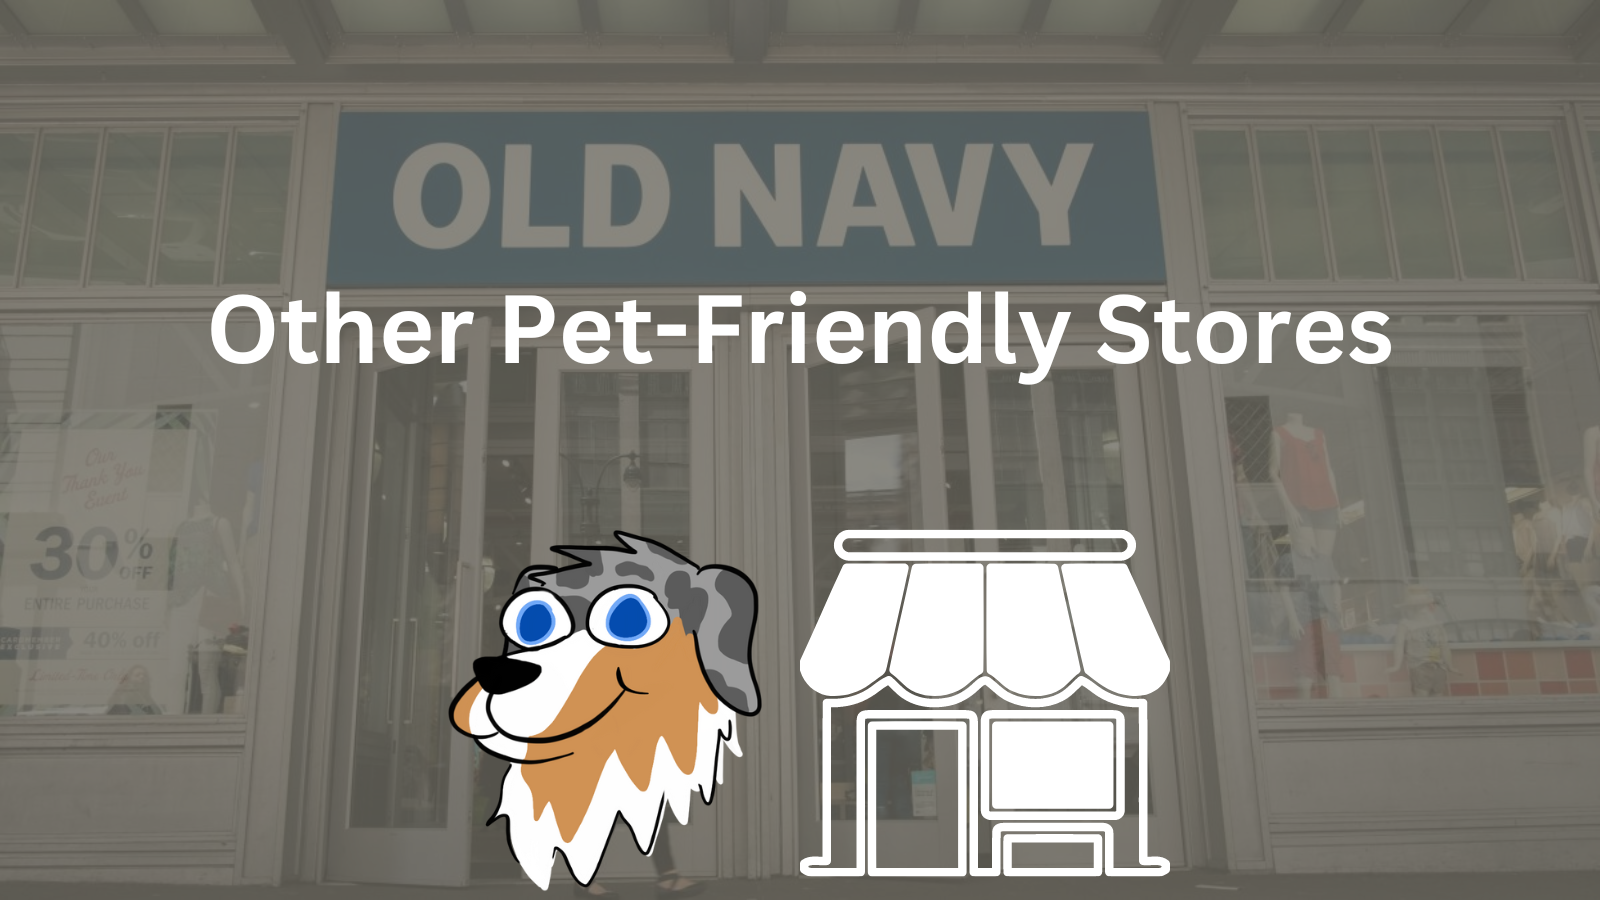 Image Text: "Other Pet-Friendly Stores"